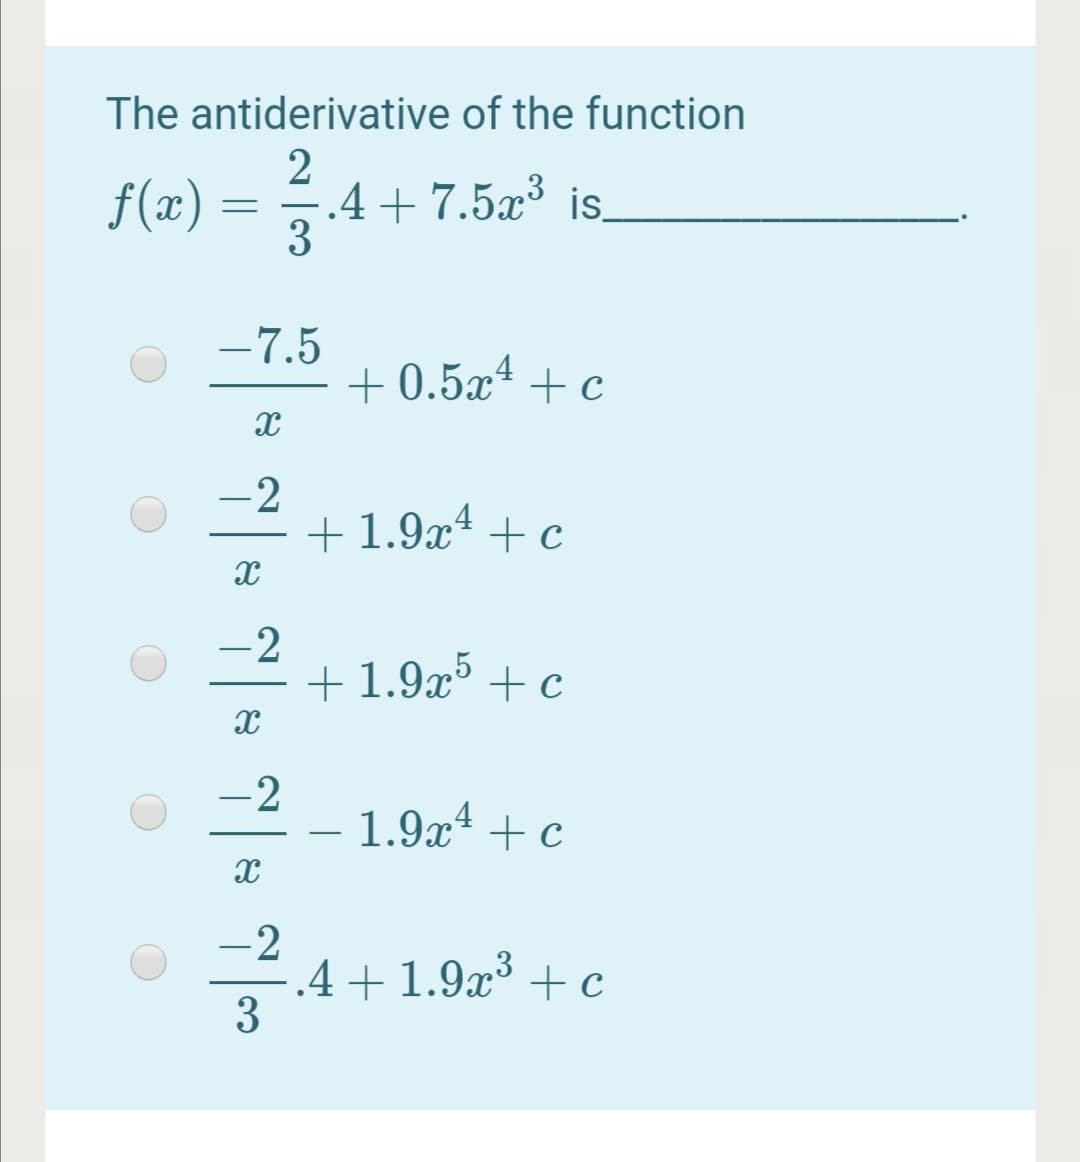 The antiderivative of the function
2
.4+7.5x³ is.
3
f(x) :
-7.5
+ 0.5x² + c
-2
+1.9x* + c
+ 1.9x4
-2
+ 1.9x³ + c
-2
1.9x* + c
-2
.4+1.9x³ + c
3
